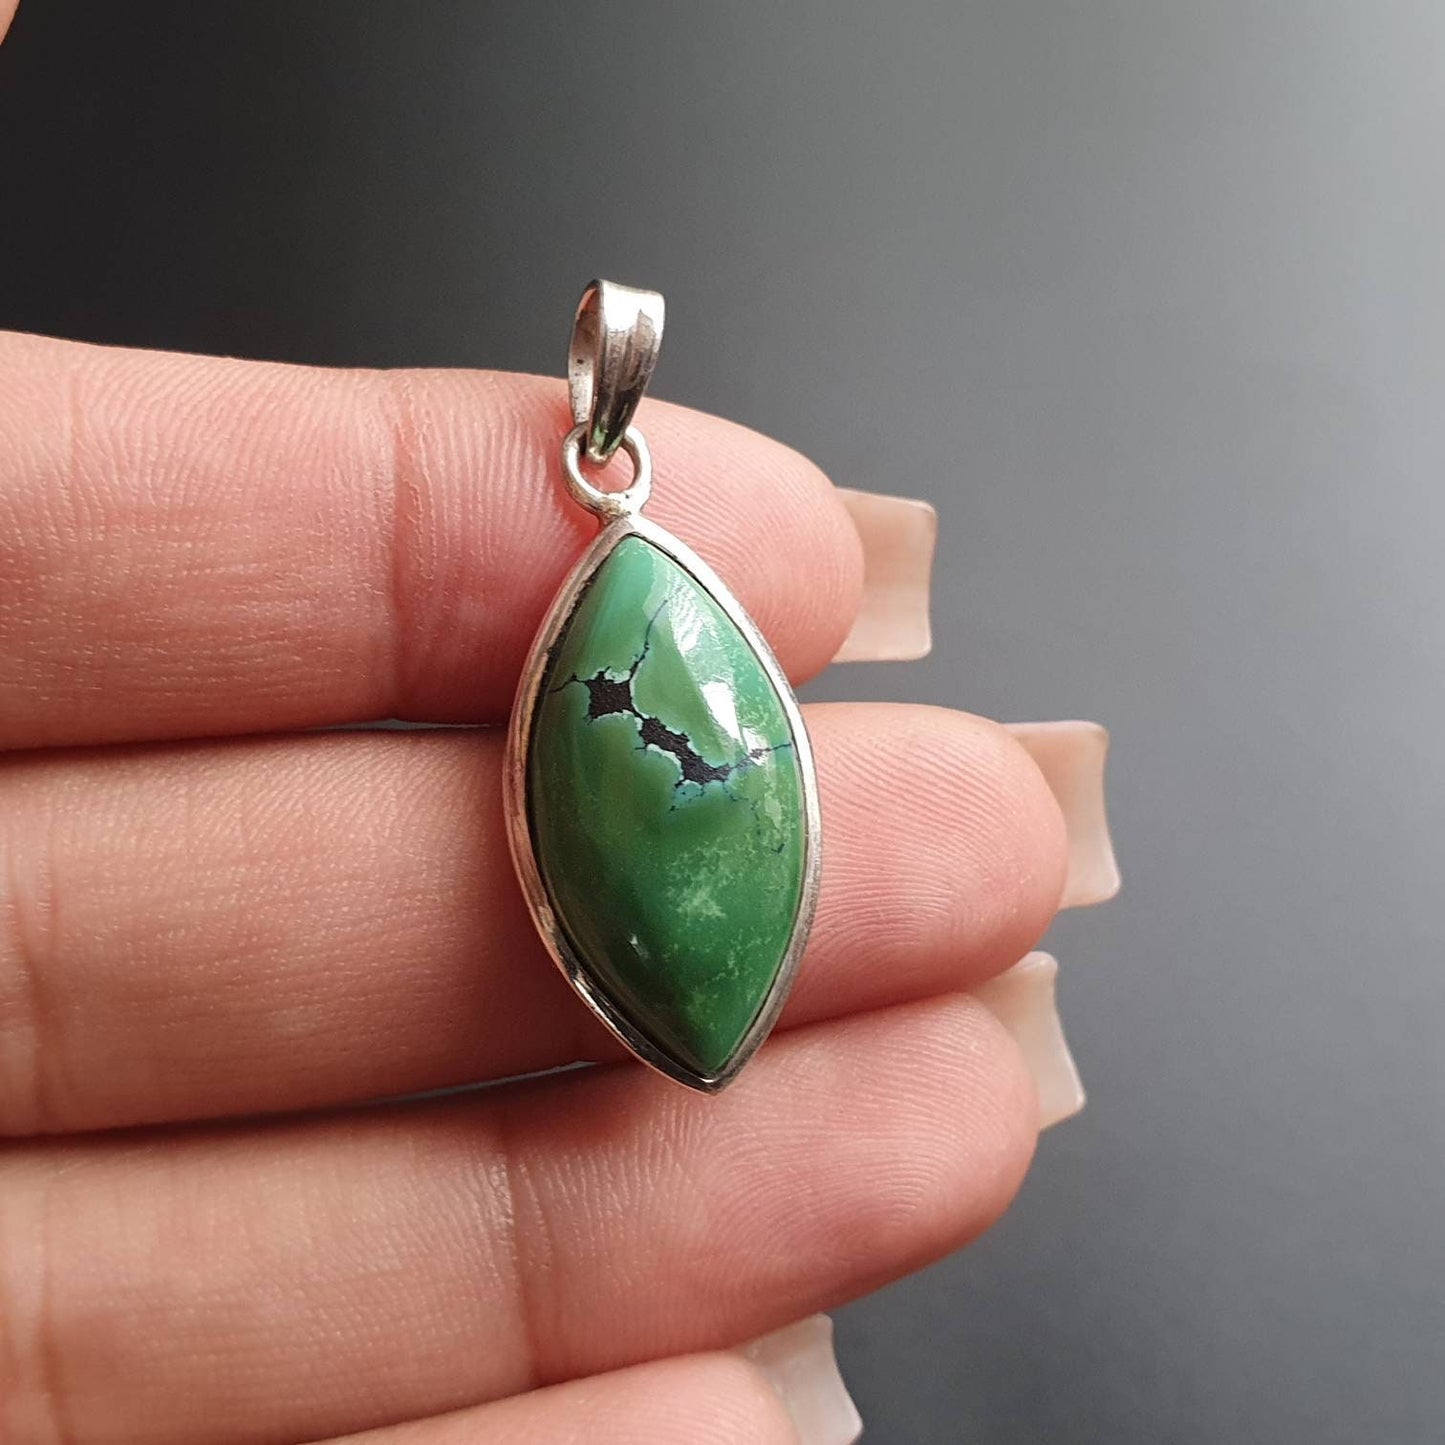 Turquoise Jewellery, Silver Pendant, Green Turquoise gemstone, Sterling Silver Vintage Pendant Necklace, Gift,marquise Gemstone Pendant